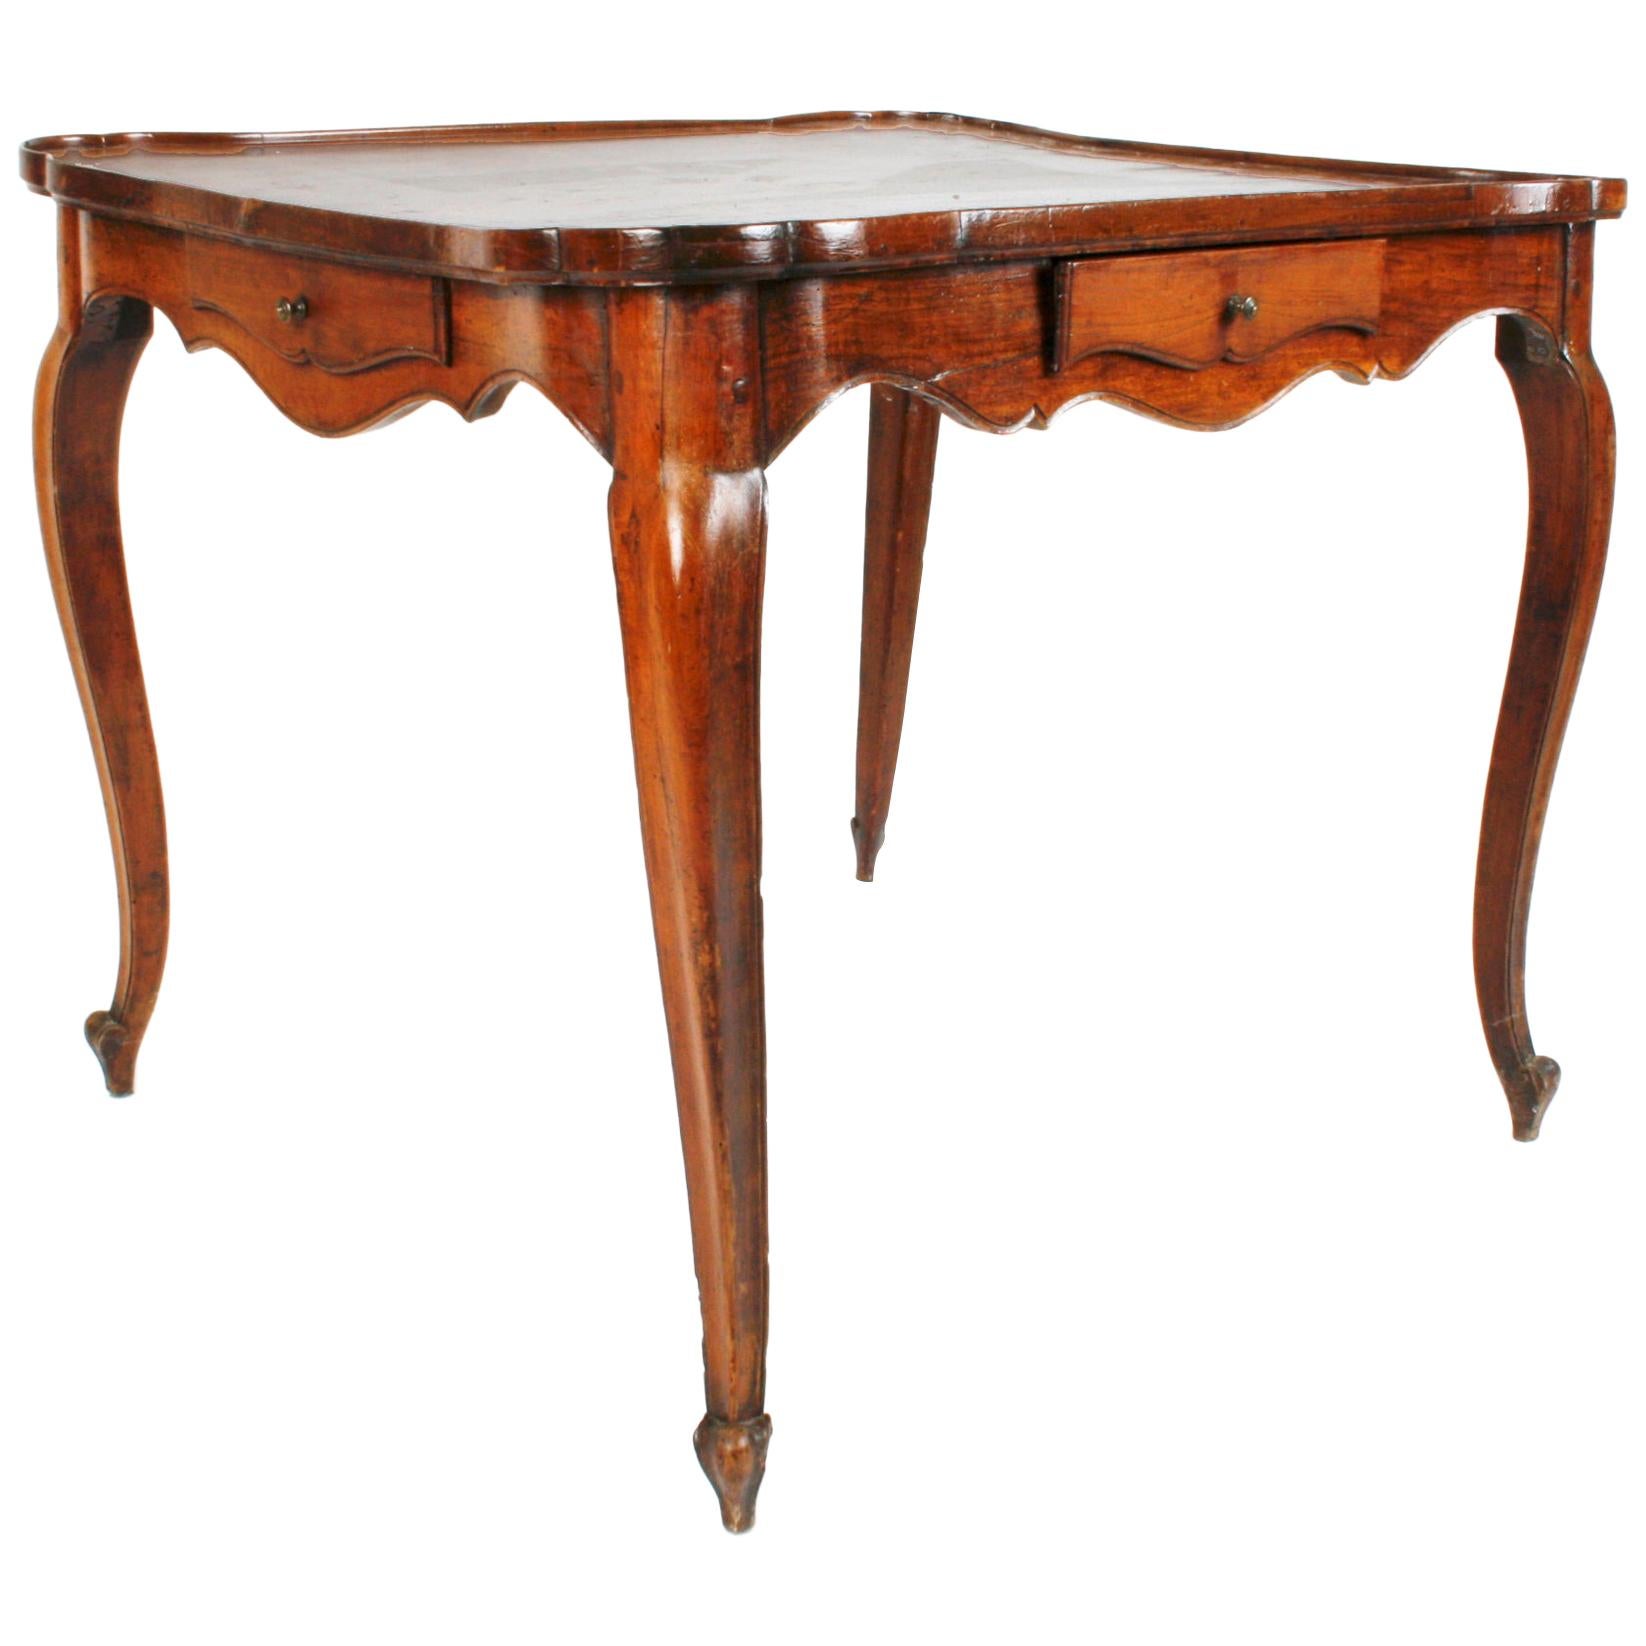 Louis XV Walnut Table with Galleried Top, circa 1780